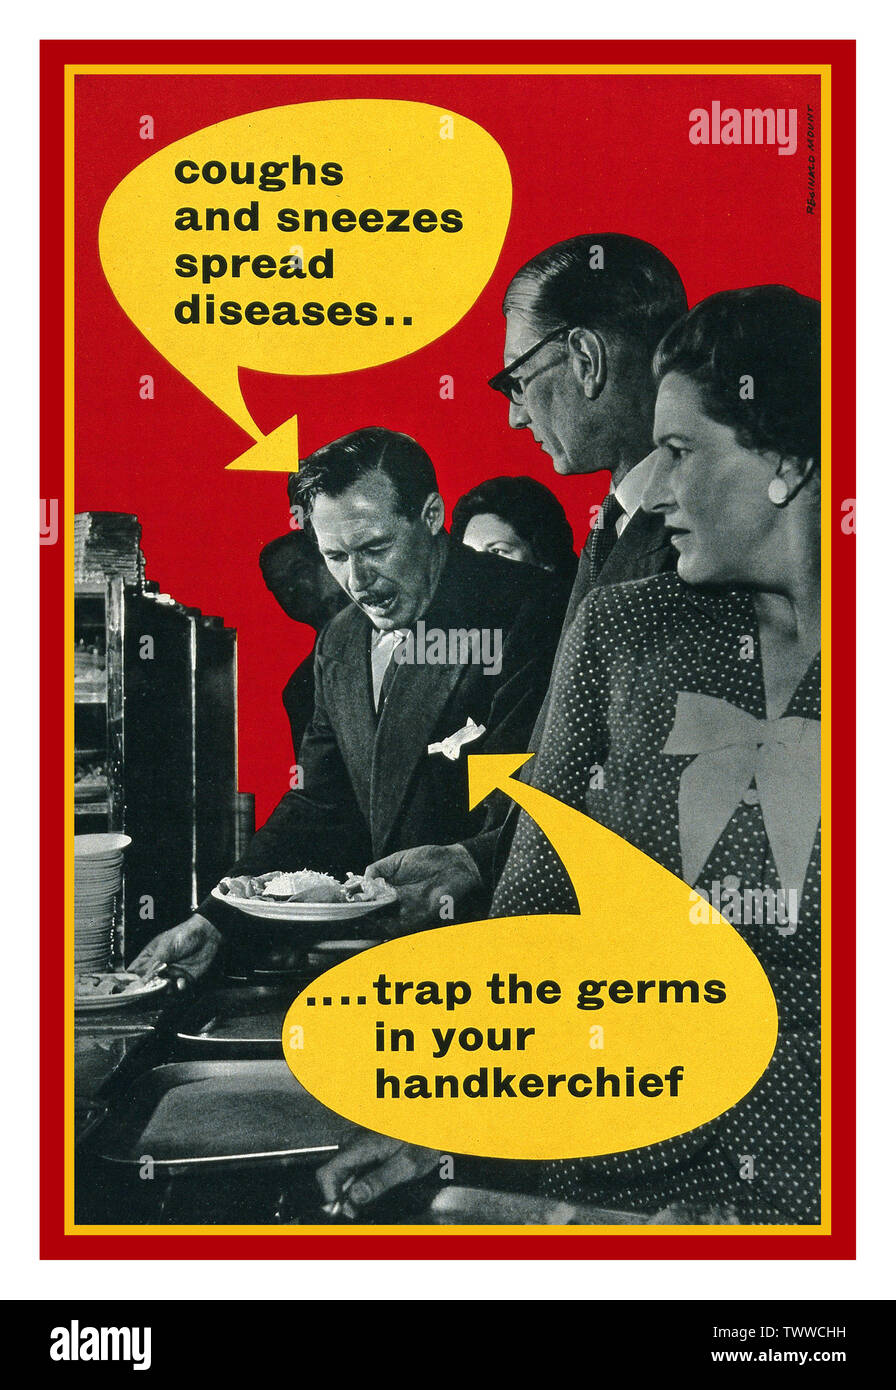 1940’s Vintage British UK Propaganda health poster.  The Ministry of Health says: 'Coughs and sneezes spread diseases'. 'Trap the germs in your handkerchief'. A man about to cough or sneeze not using a hankerchief Colour lithograph Stock Photo